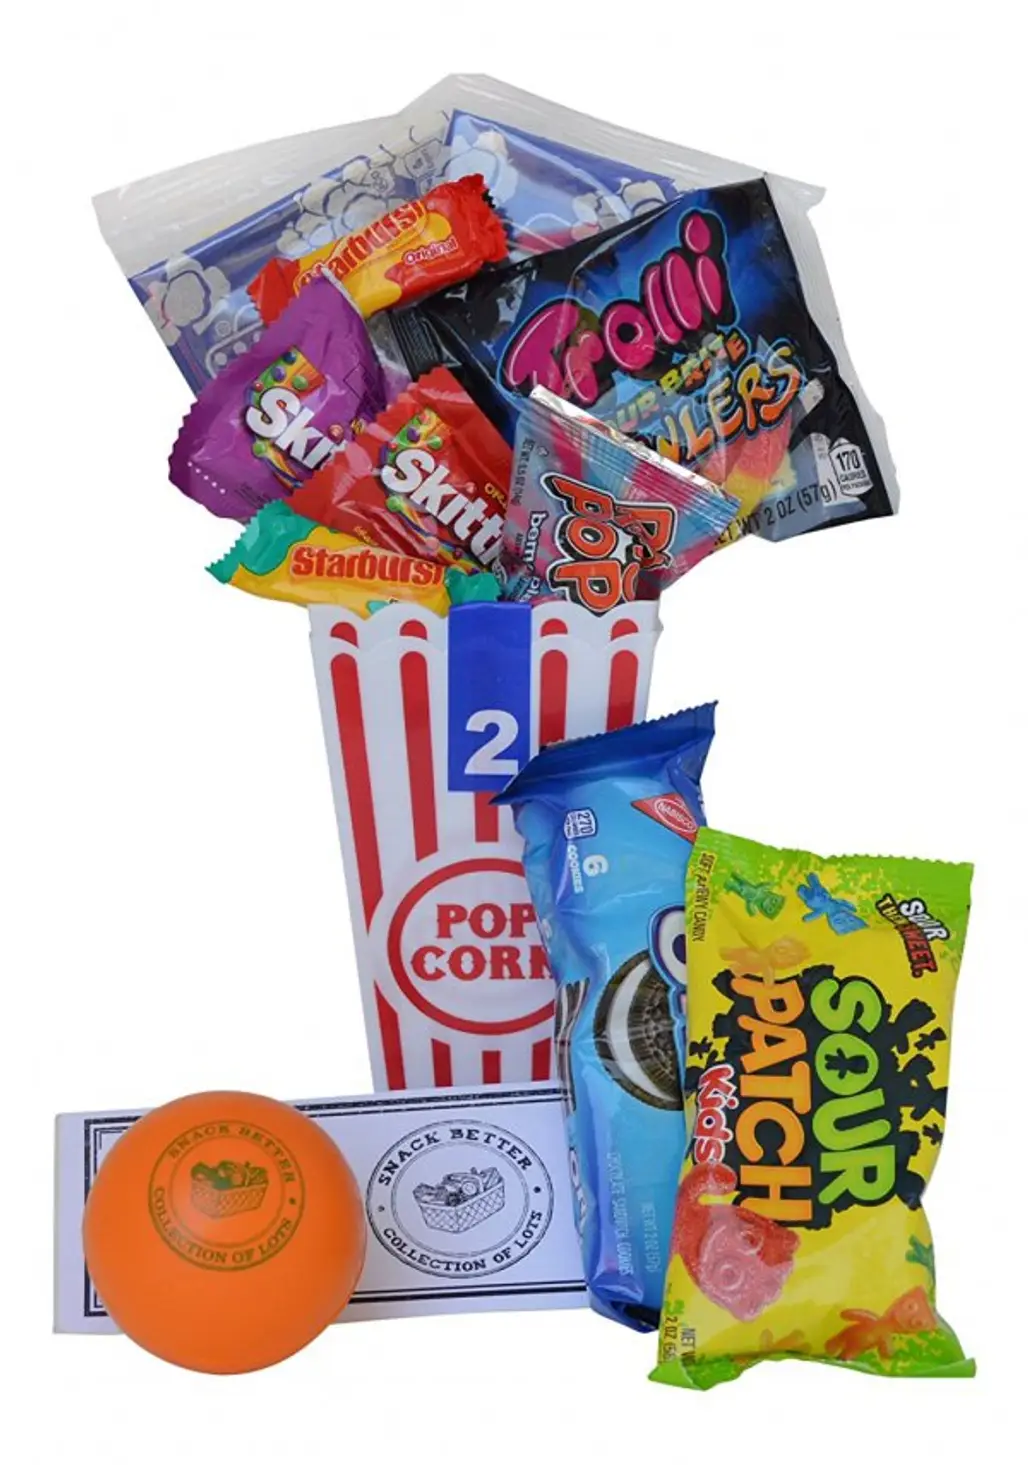 Sour Patch Kids, Popcorn, food, gift basket, product,